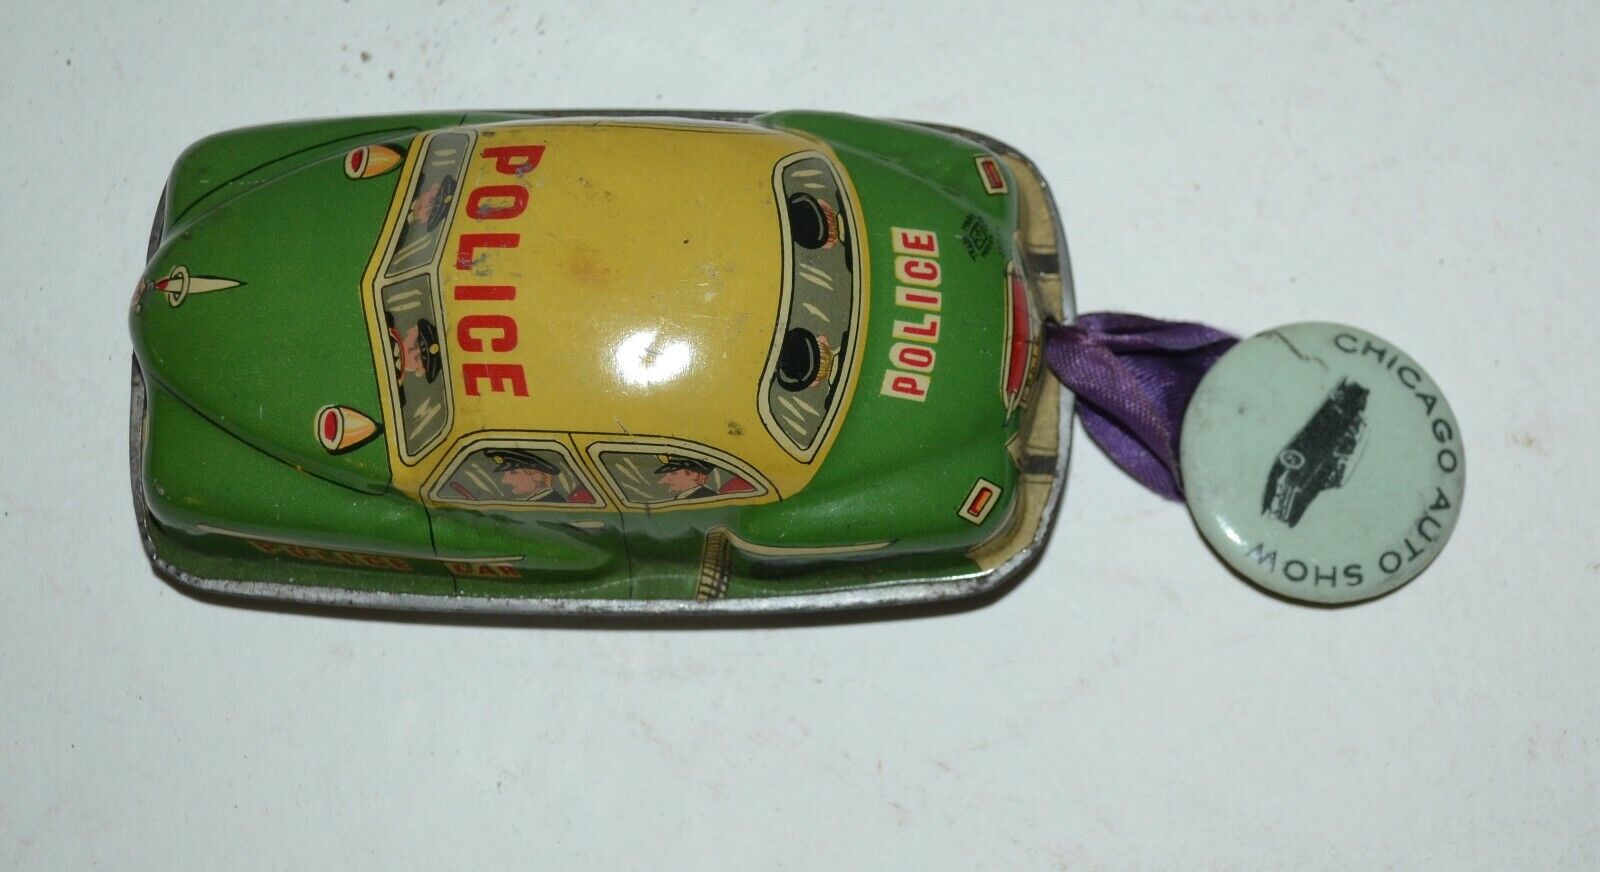 Vintage 1950s Chicago Auto Show Giveaway Friction Police Car & Pinback Button